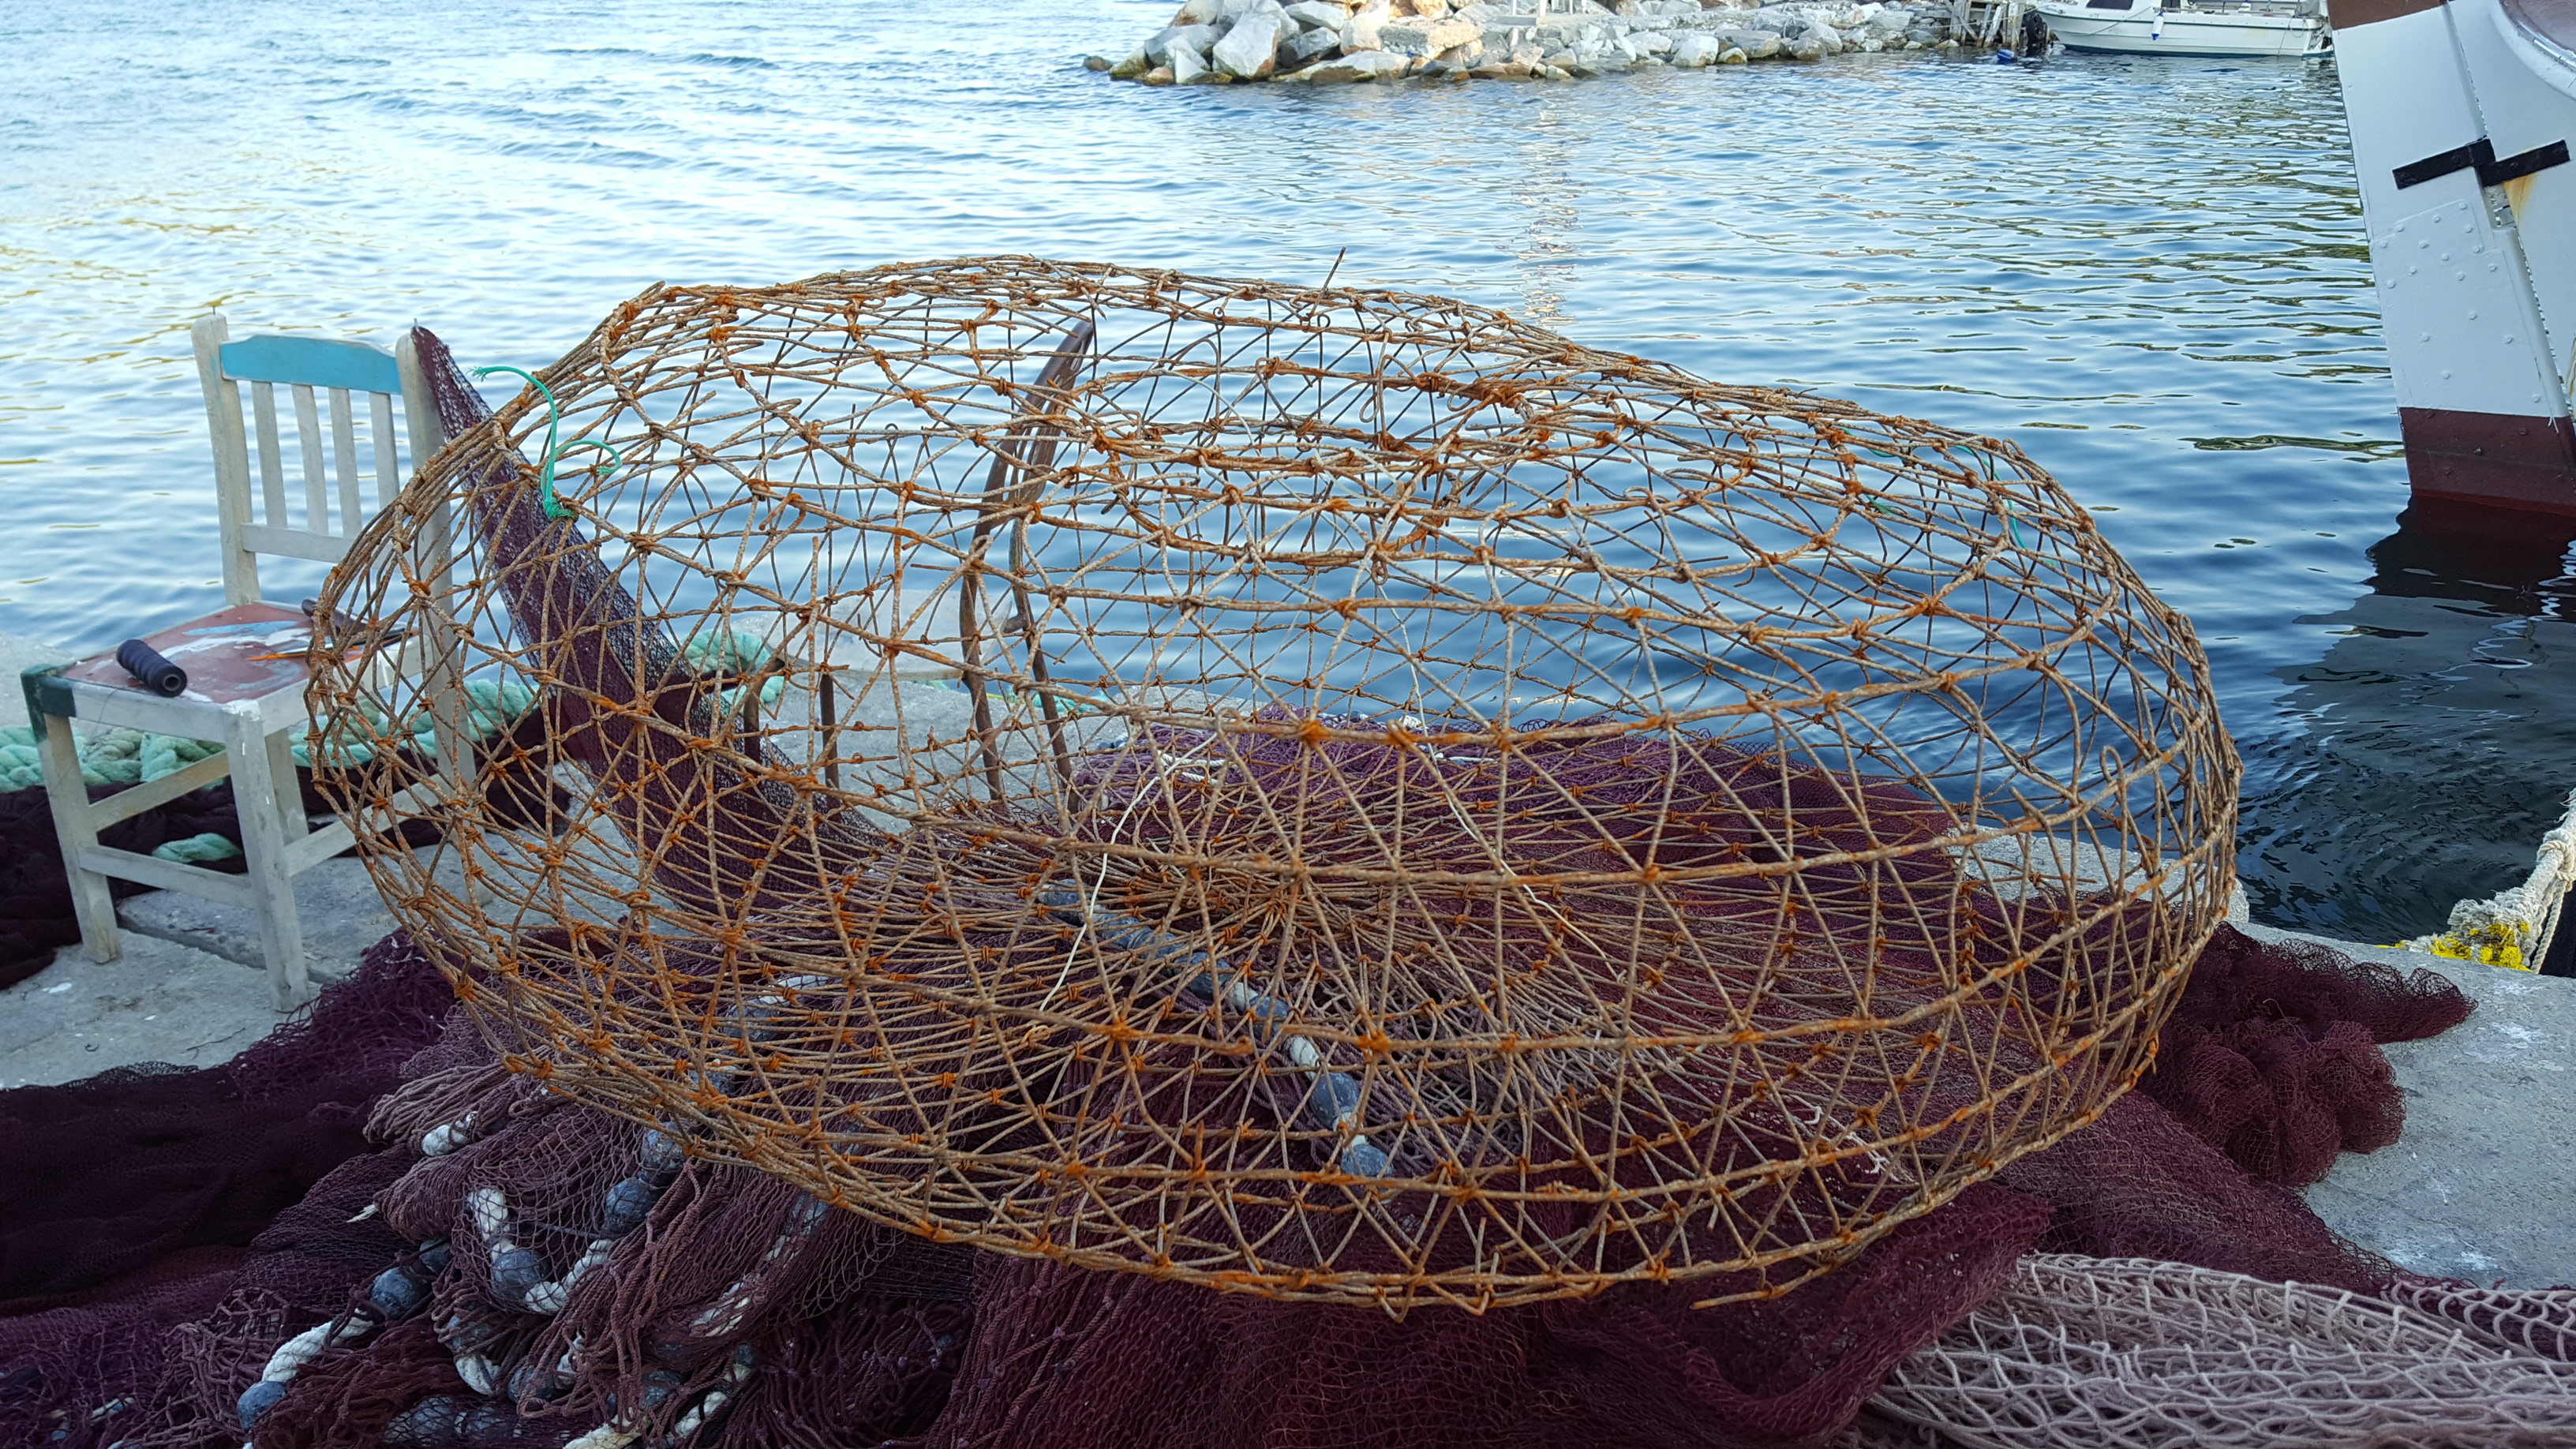 Fishing nets for octopus (Kyrtos) in iron wire, made by Andonis Karantonis around 1980 in Pirghi, Lesbos, Greece, acquired for Mucem in July 2017